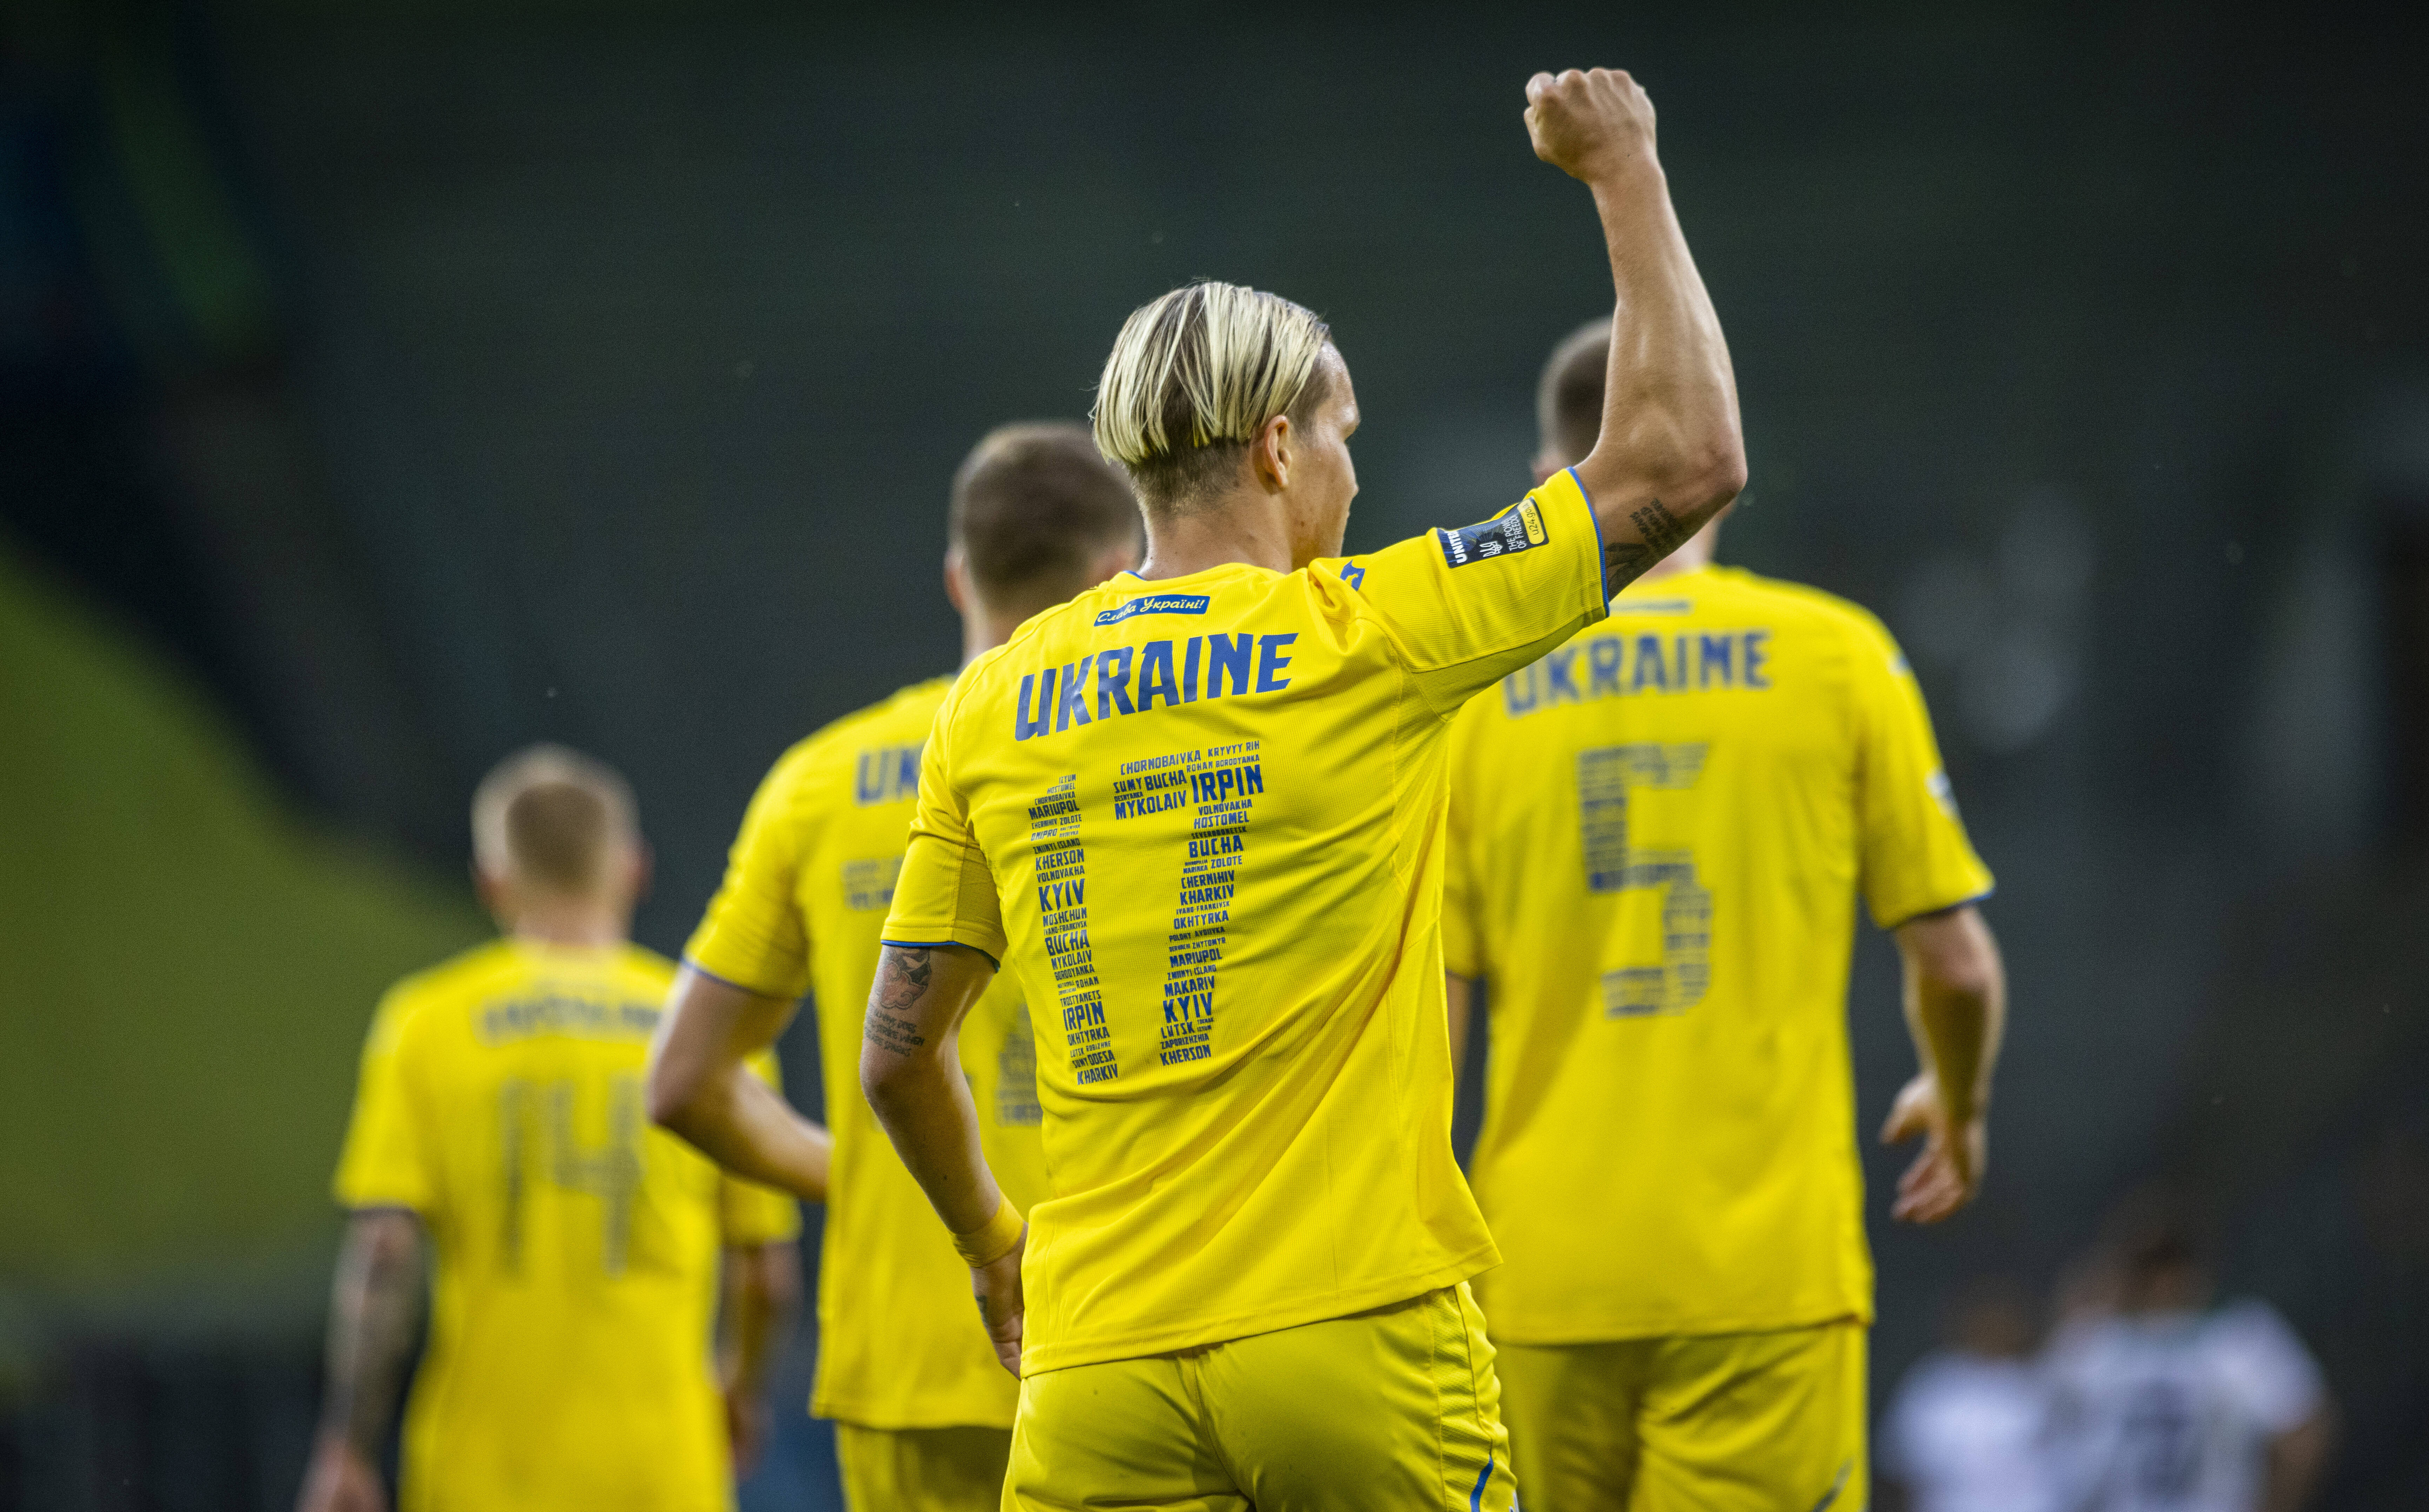 Ukraine play 1st soccer game of 2022 ahead of World Cup play-offs - Futbol on FanNation